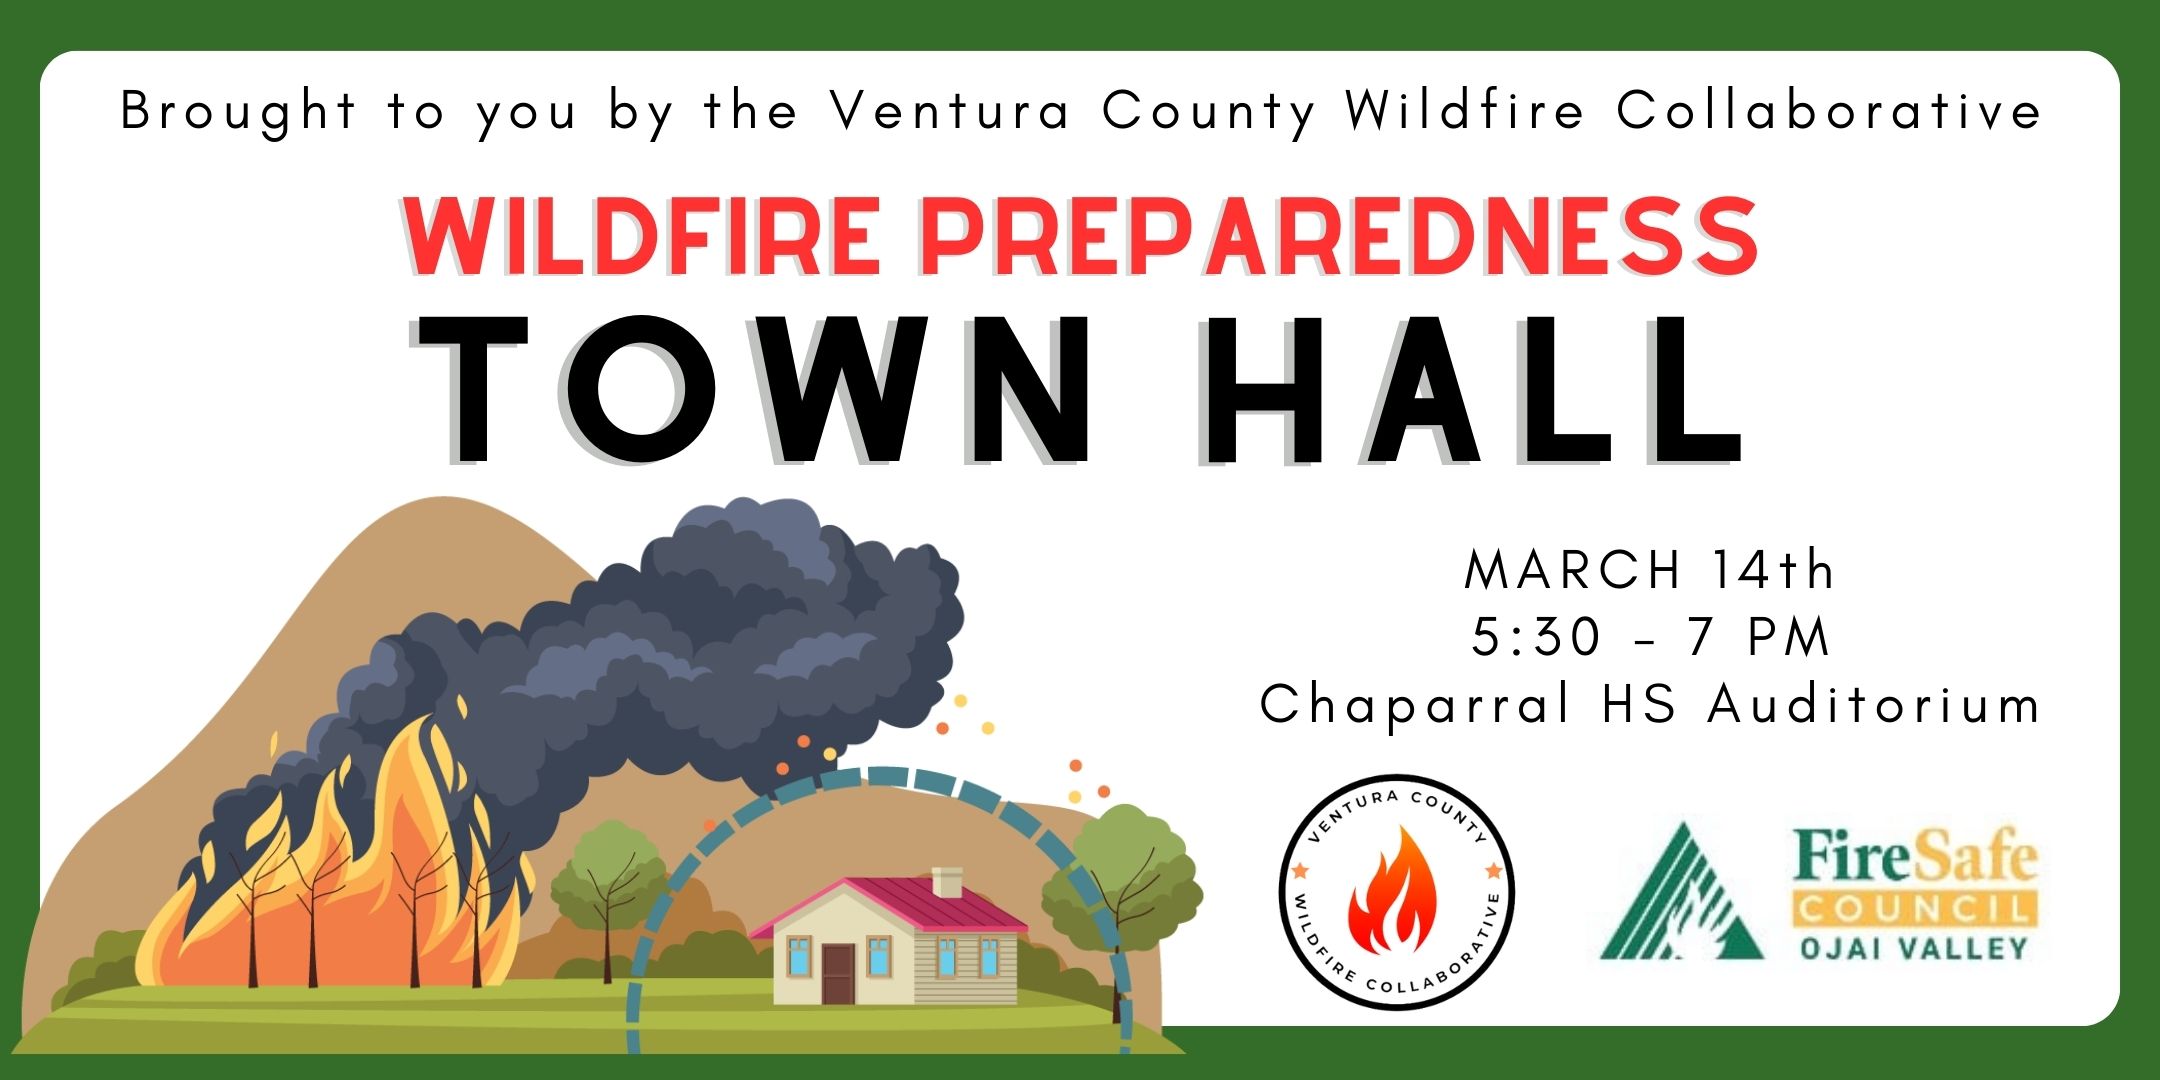 Ojai Valley Town Hall March 14th 5:30 to 7 PM at Chapparal High School Auditorium